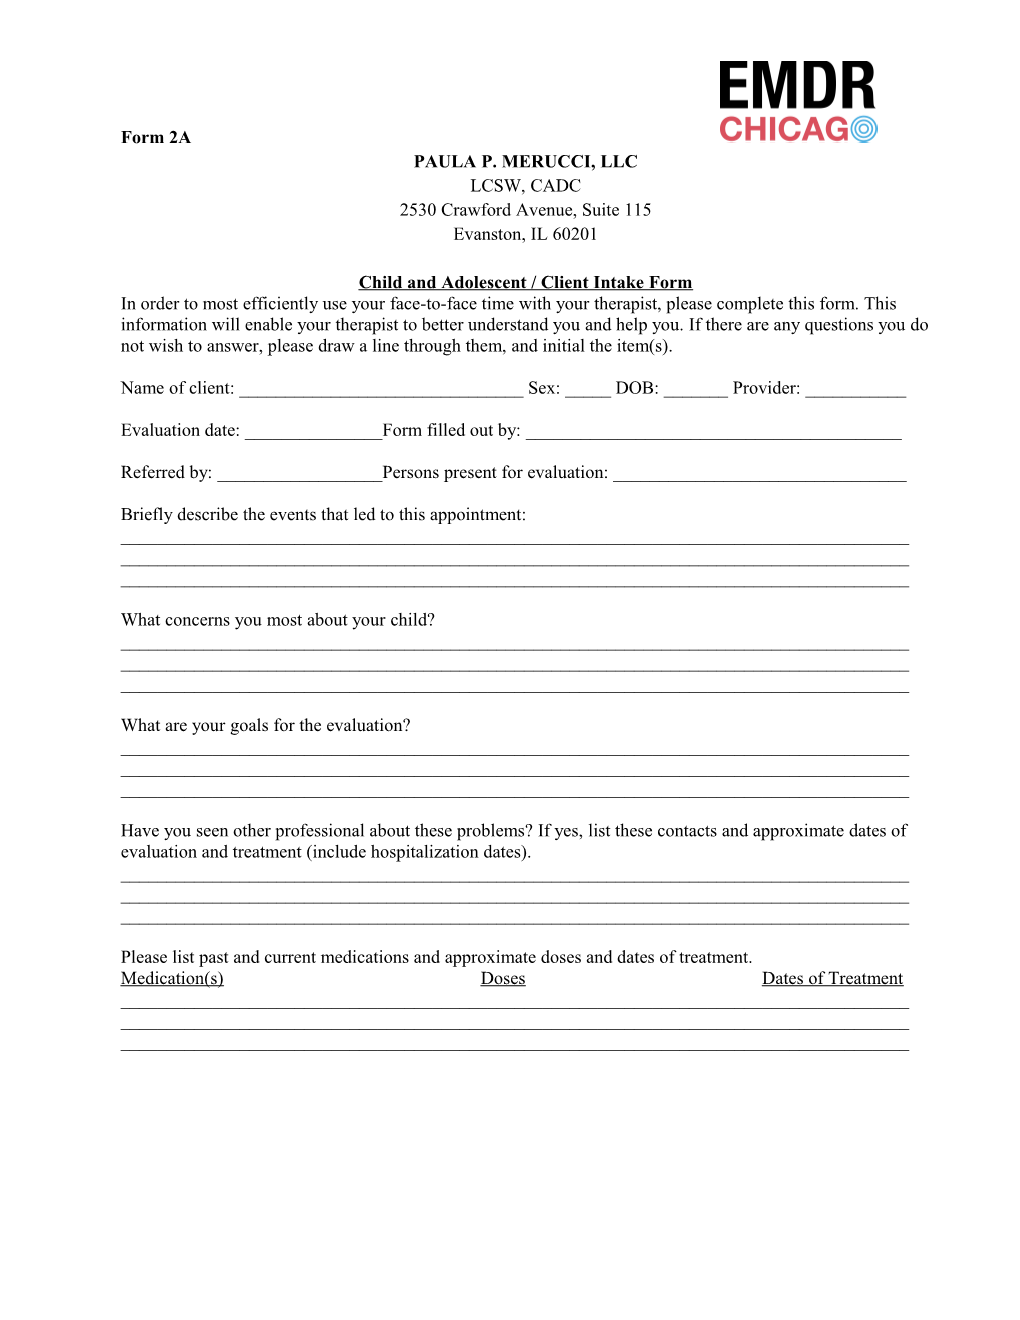 Child and Adolescent / Client Information Form